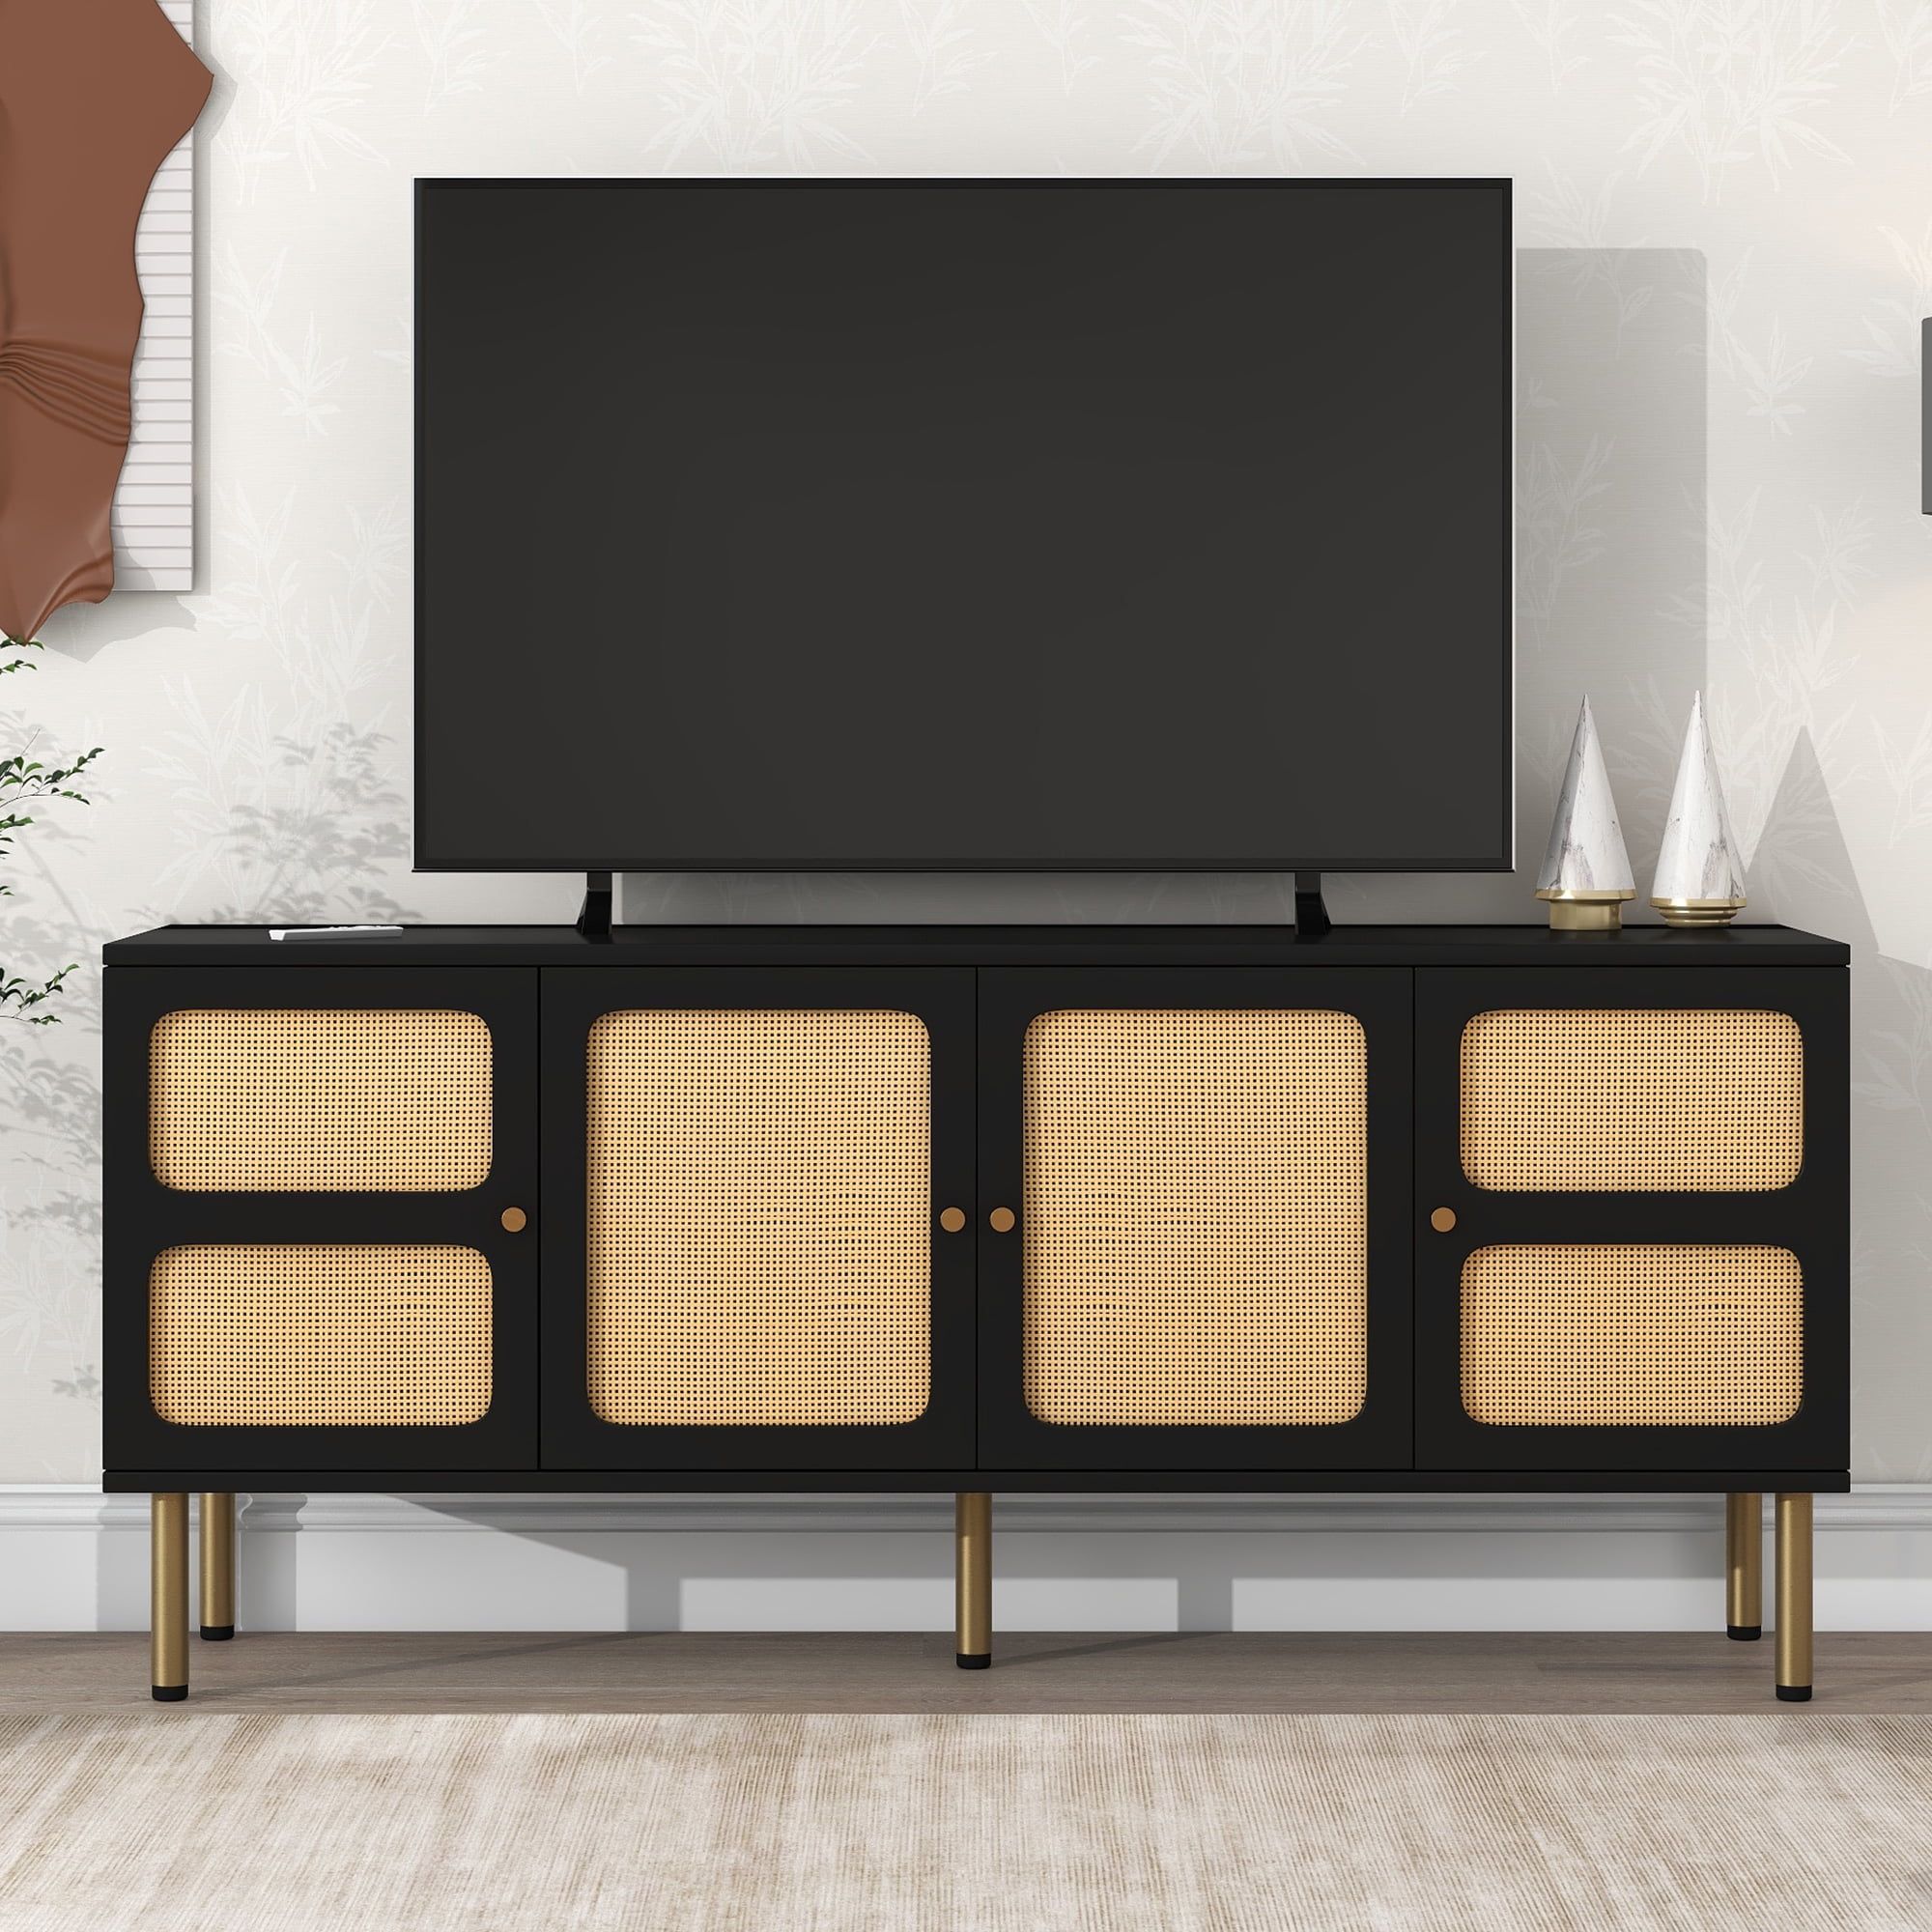 Farmhouse Rattan Tv Stand For 70 Inch Tv, Boho Style Tv Stand With Rattan  Door, Woven Media Console Table, Country Style Design Side Board With Gold  Metal Base For Living Room Bedroom, Pertaining To Farmhouse Rattan Tv Stands (View 7 of 15)